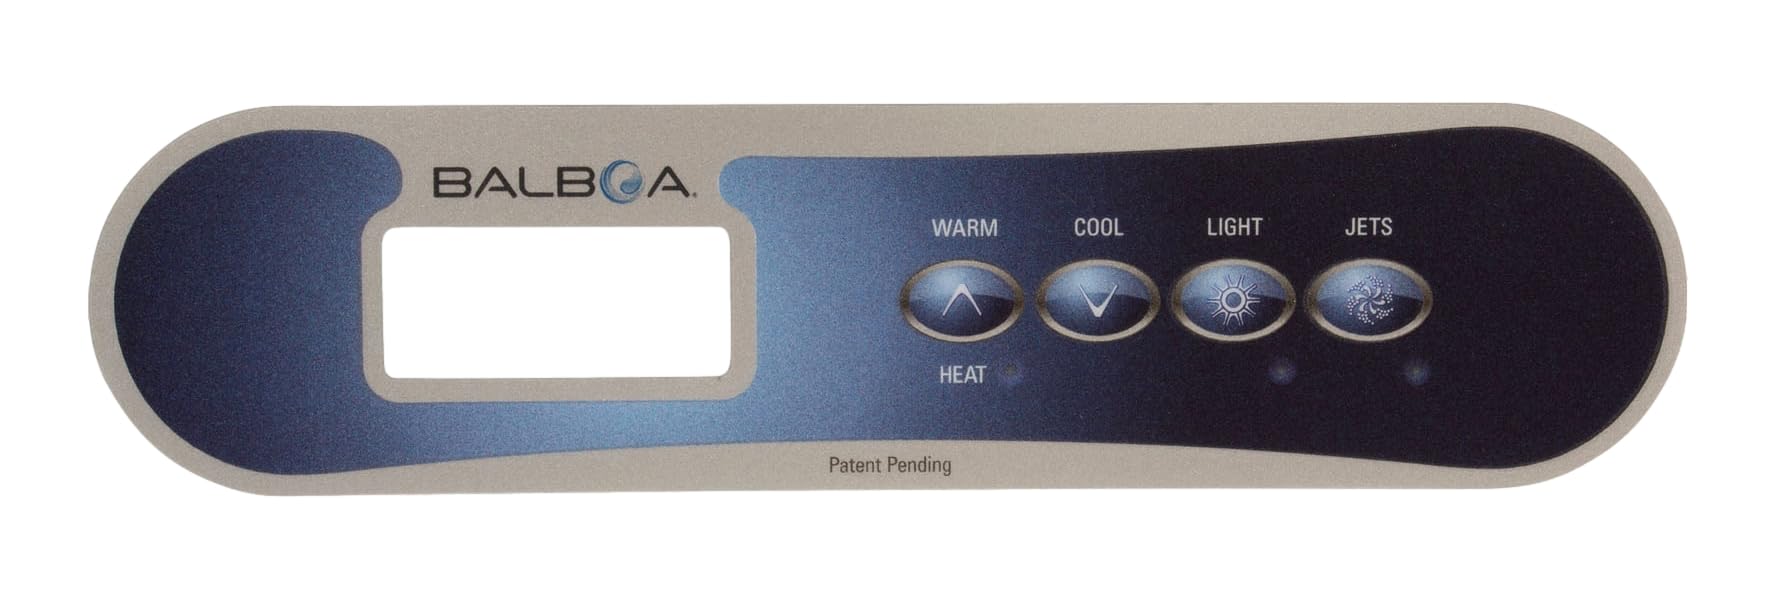 Balboa Water Group 12510 TP400W Overlay w/ 4 Buttons- Warm/Cool/Light/Jet - image 4 of 5